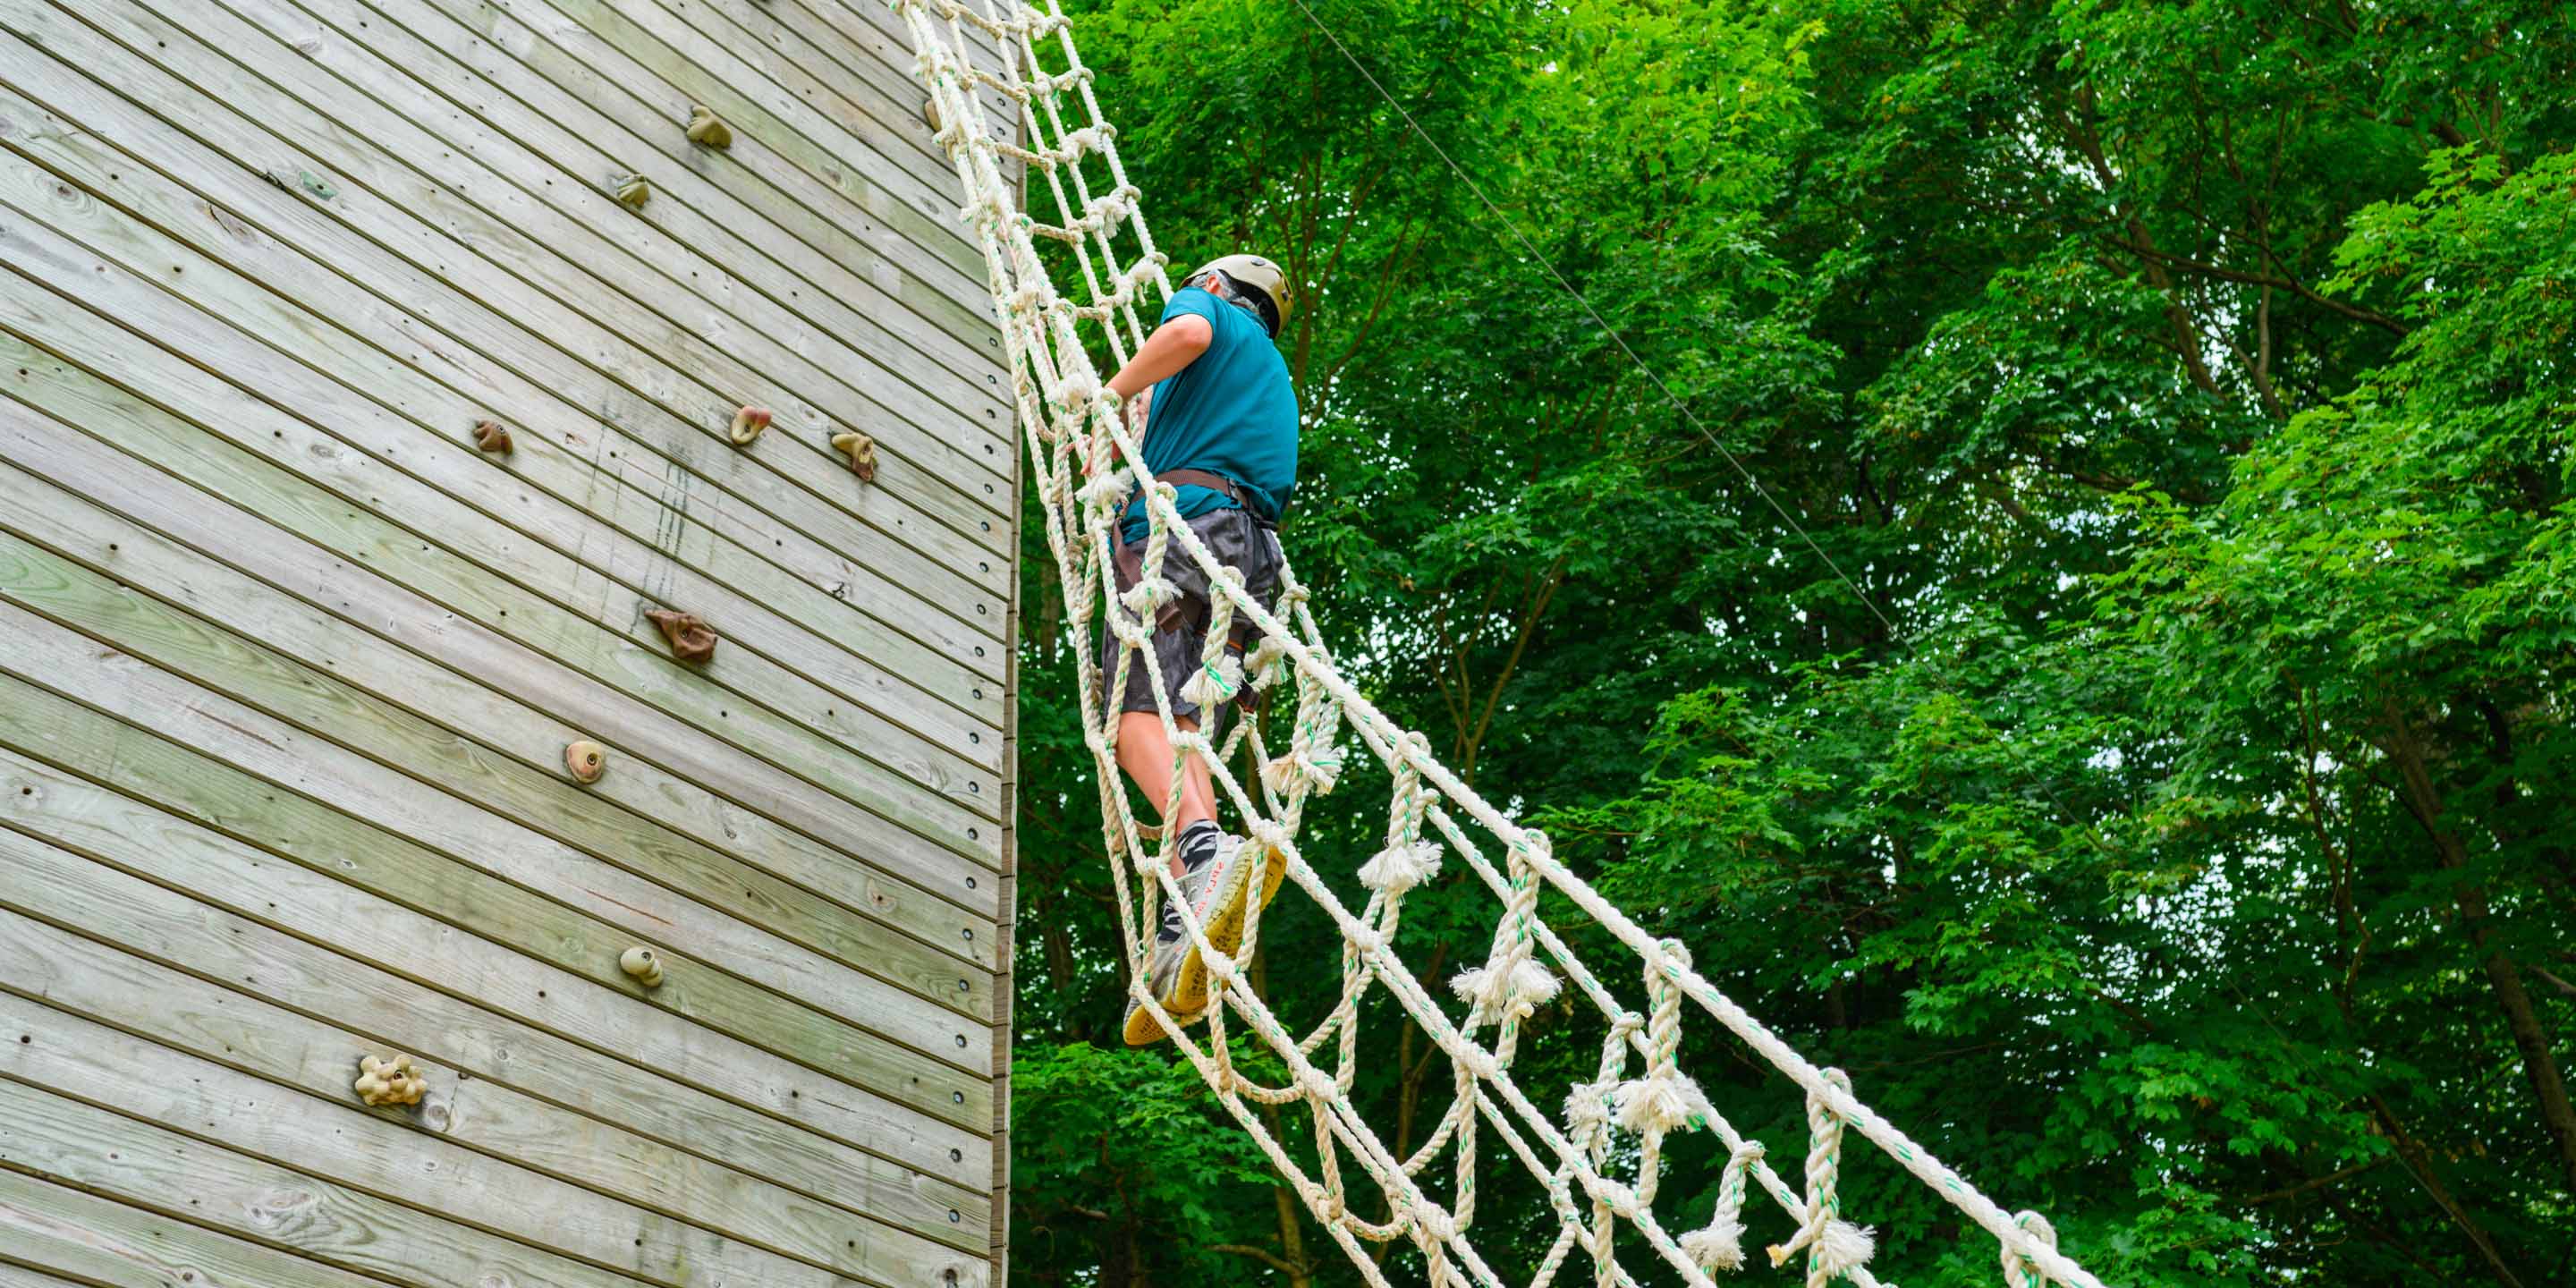 Camper going up ropes course